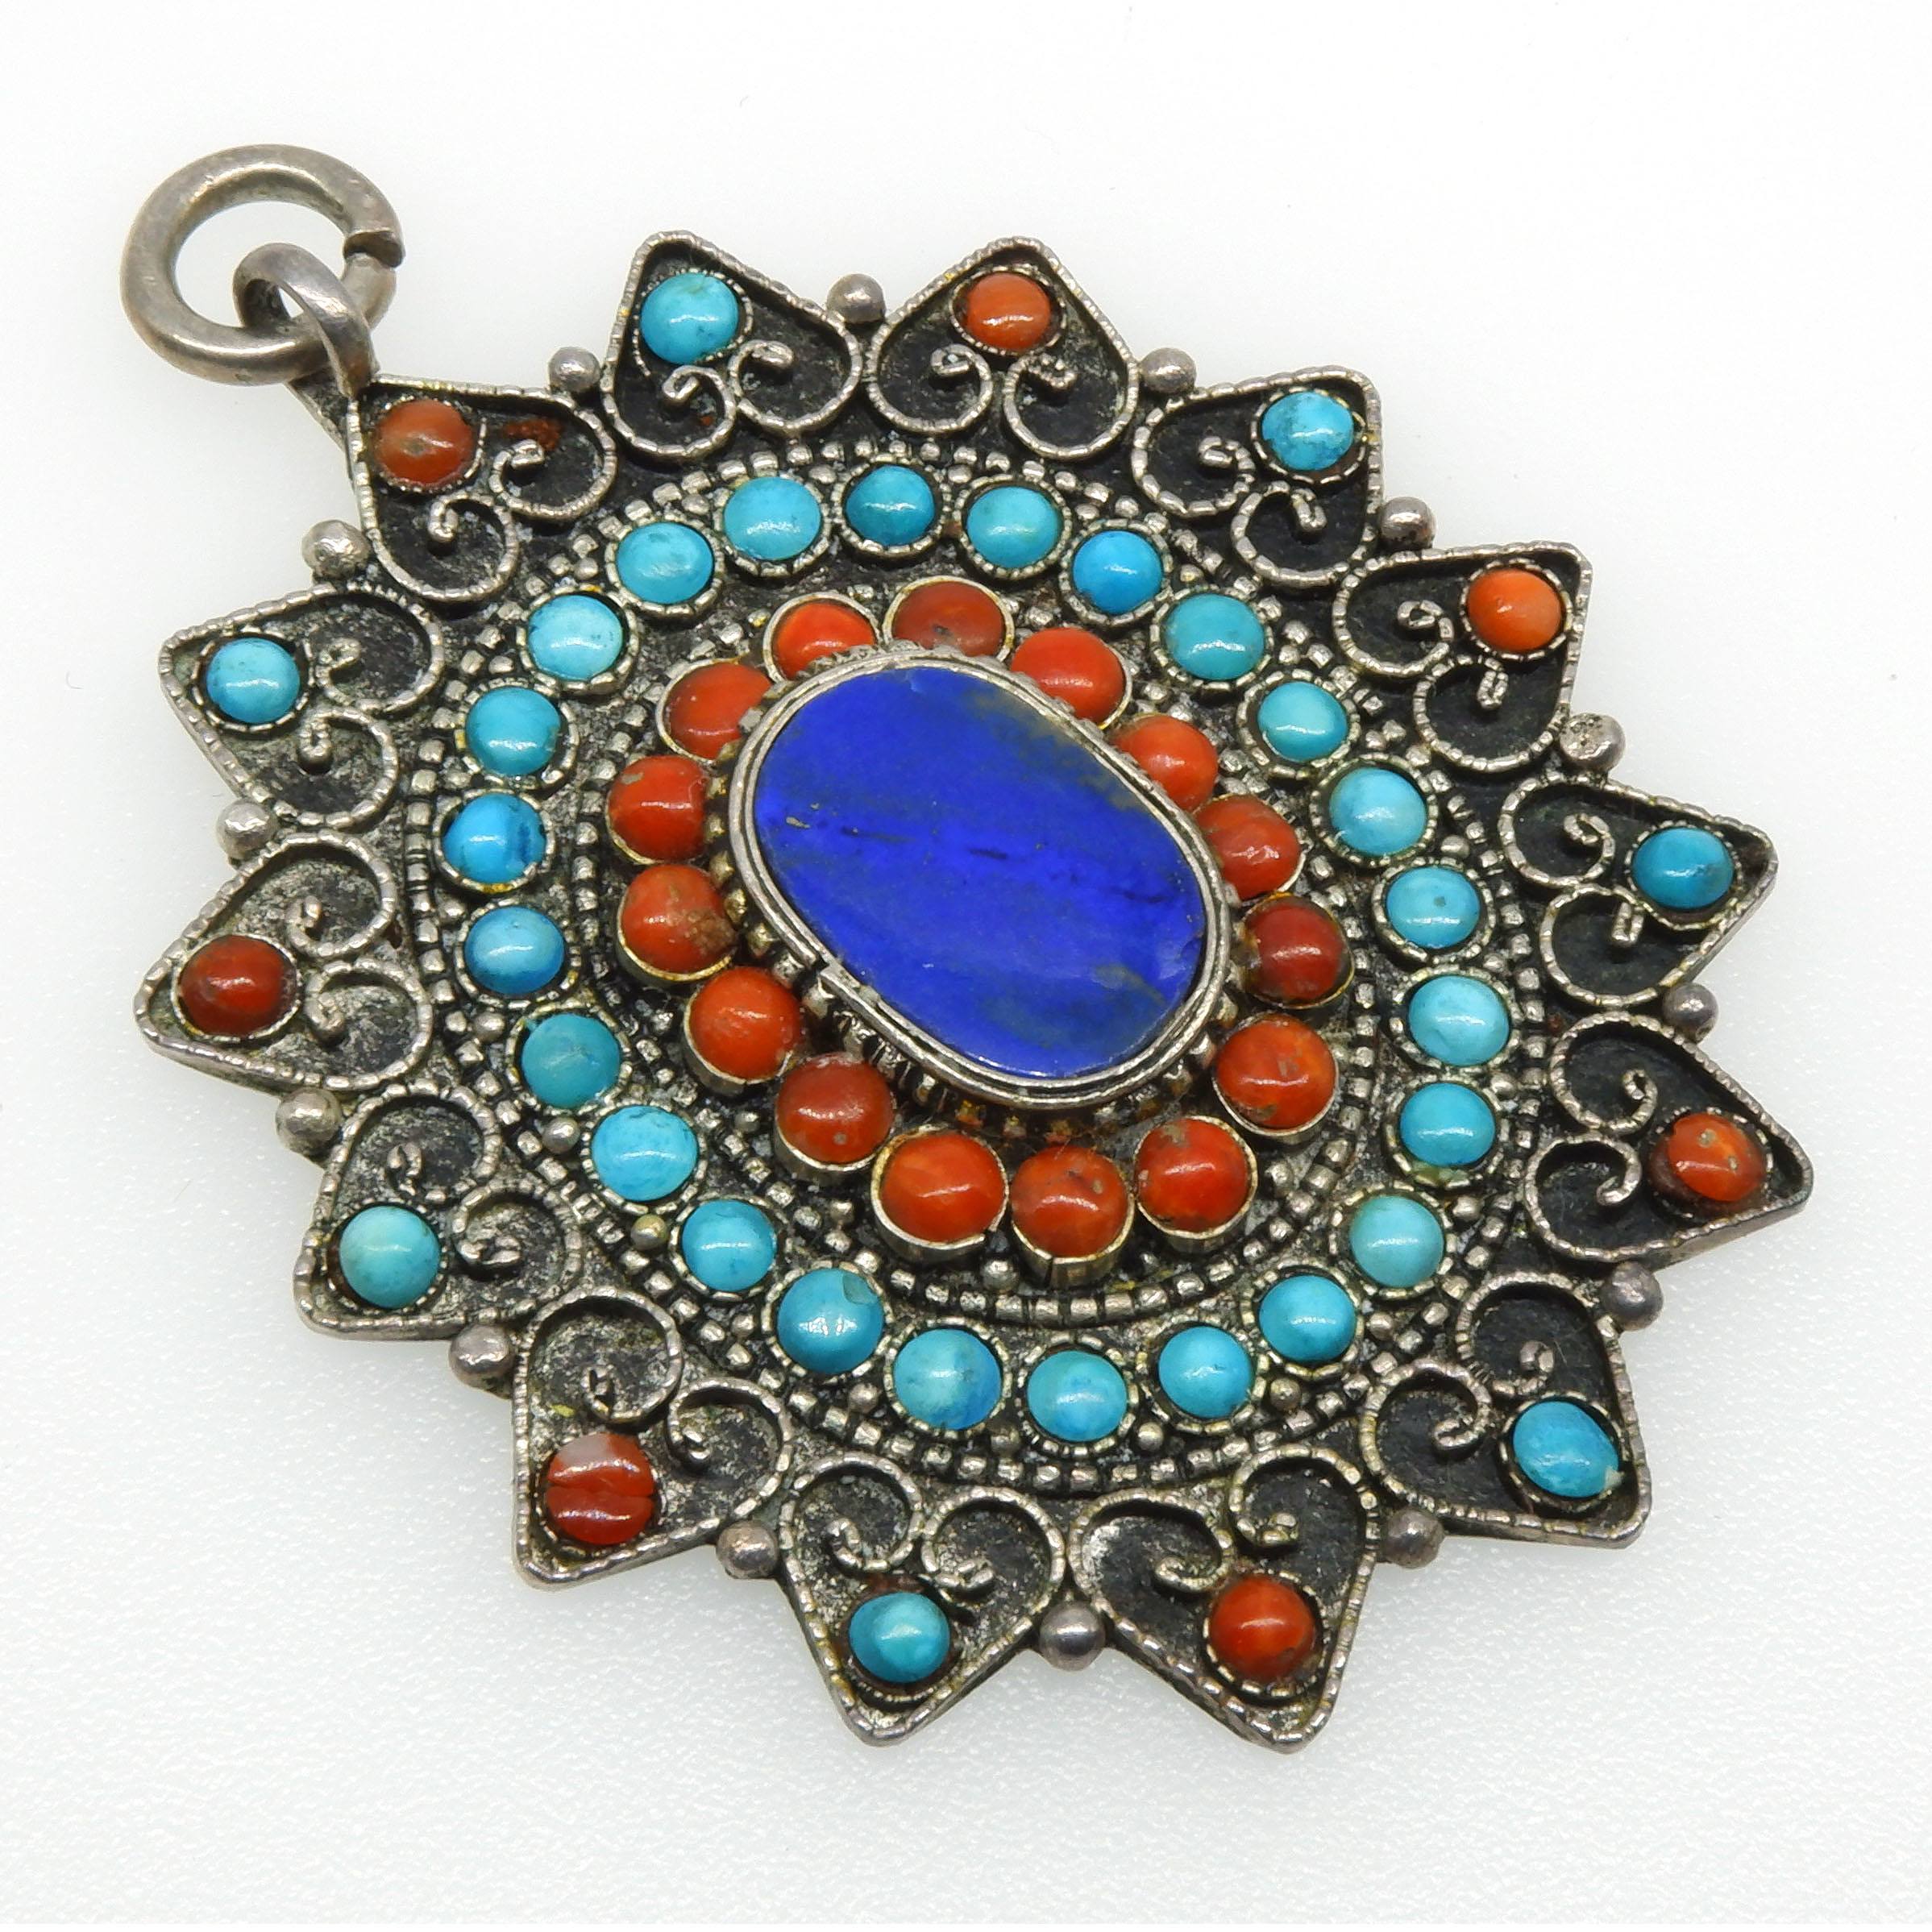 'Turkish Silver Filigree Pendant with Round Turquoise and Coral Cabochon and centre Oval Slab of Lapis Lazuli'